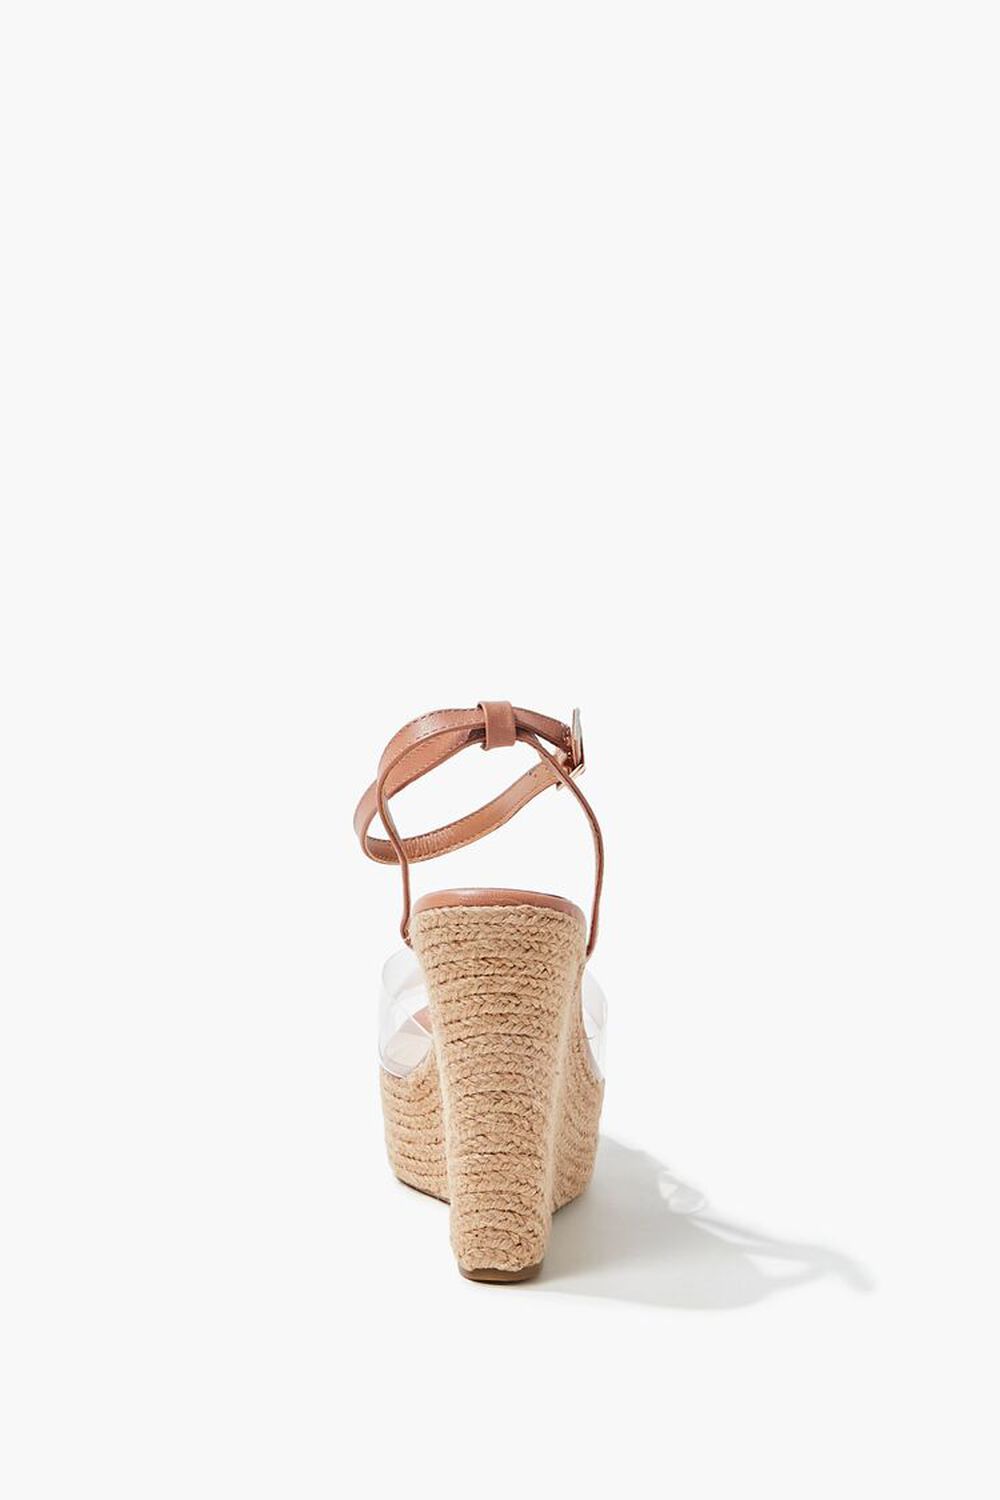 CLEAR Clear-Strap Espadrille Wedges, image 2